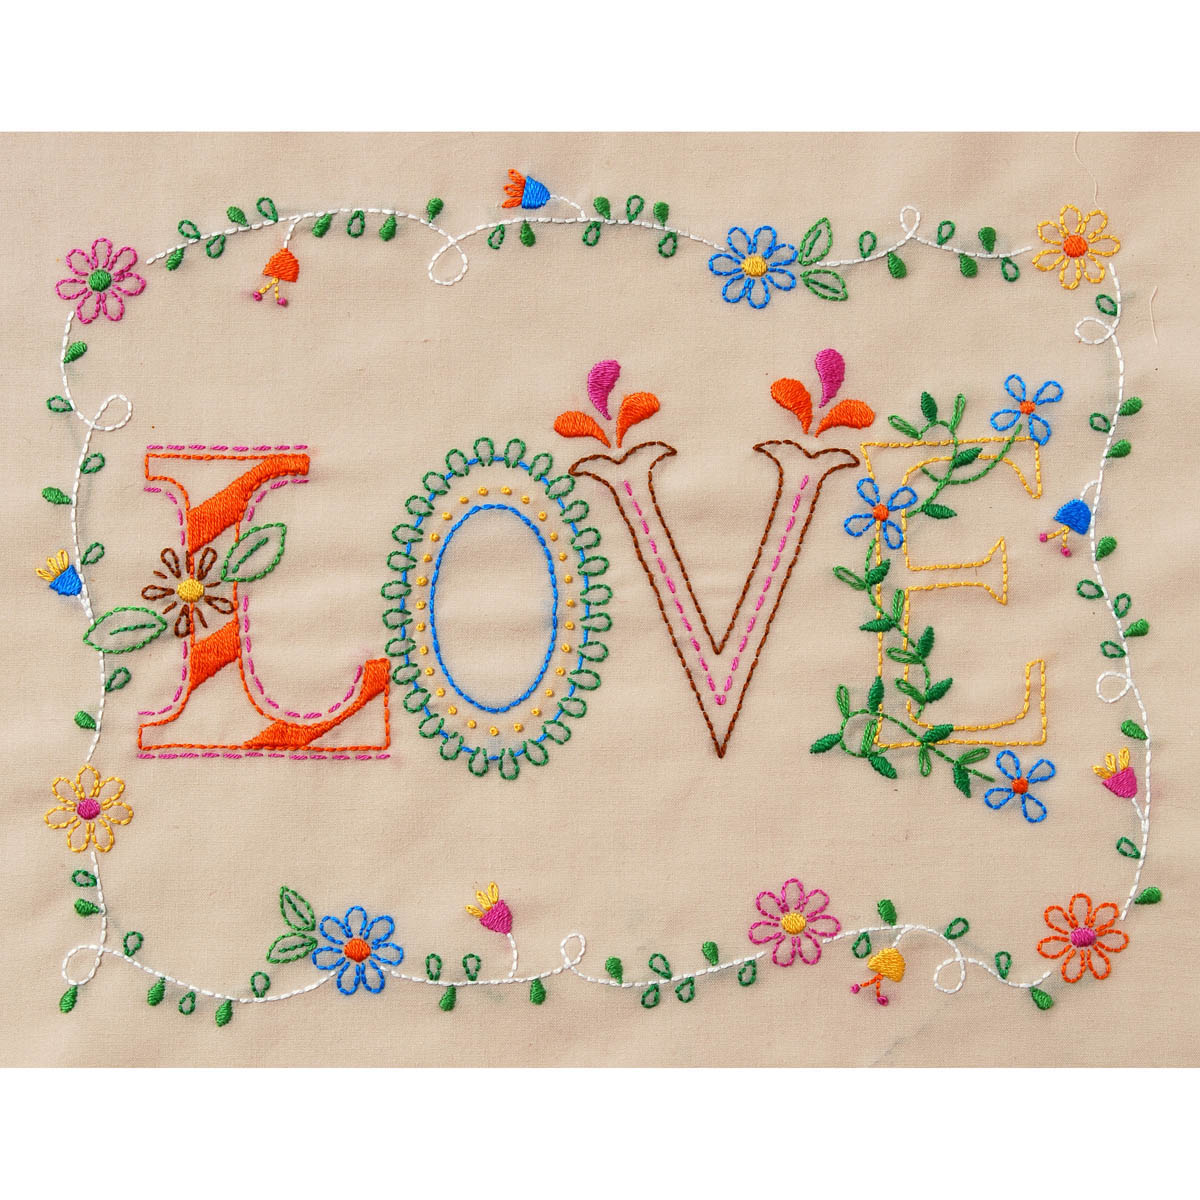 Bucilla ® Stamped Embroidery - Picture Kits - Love - 46276